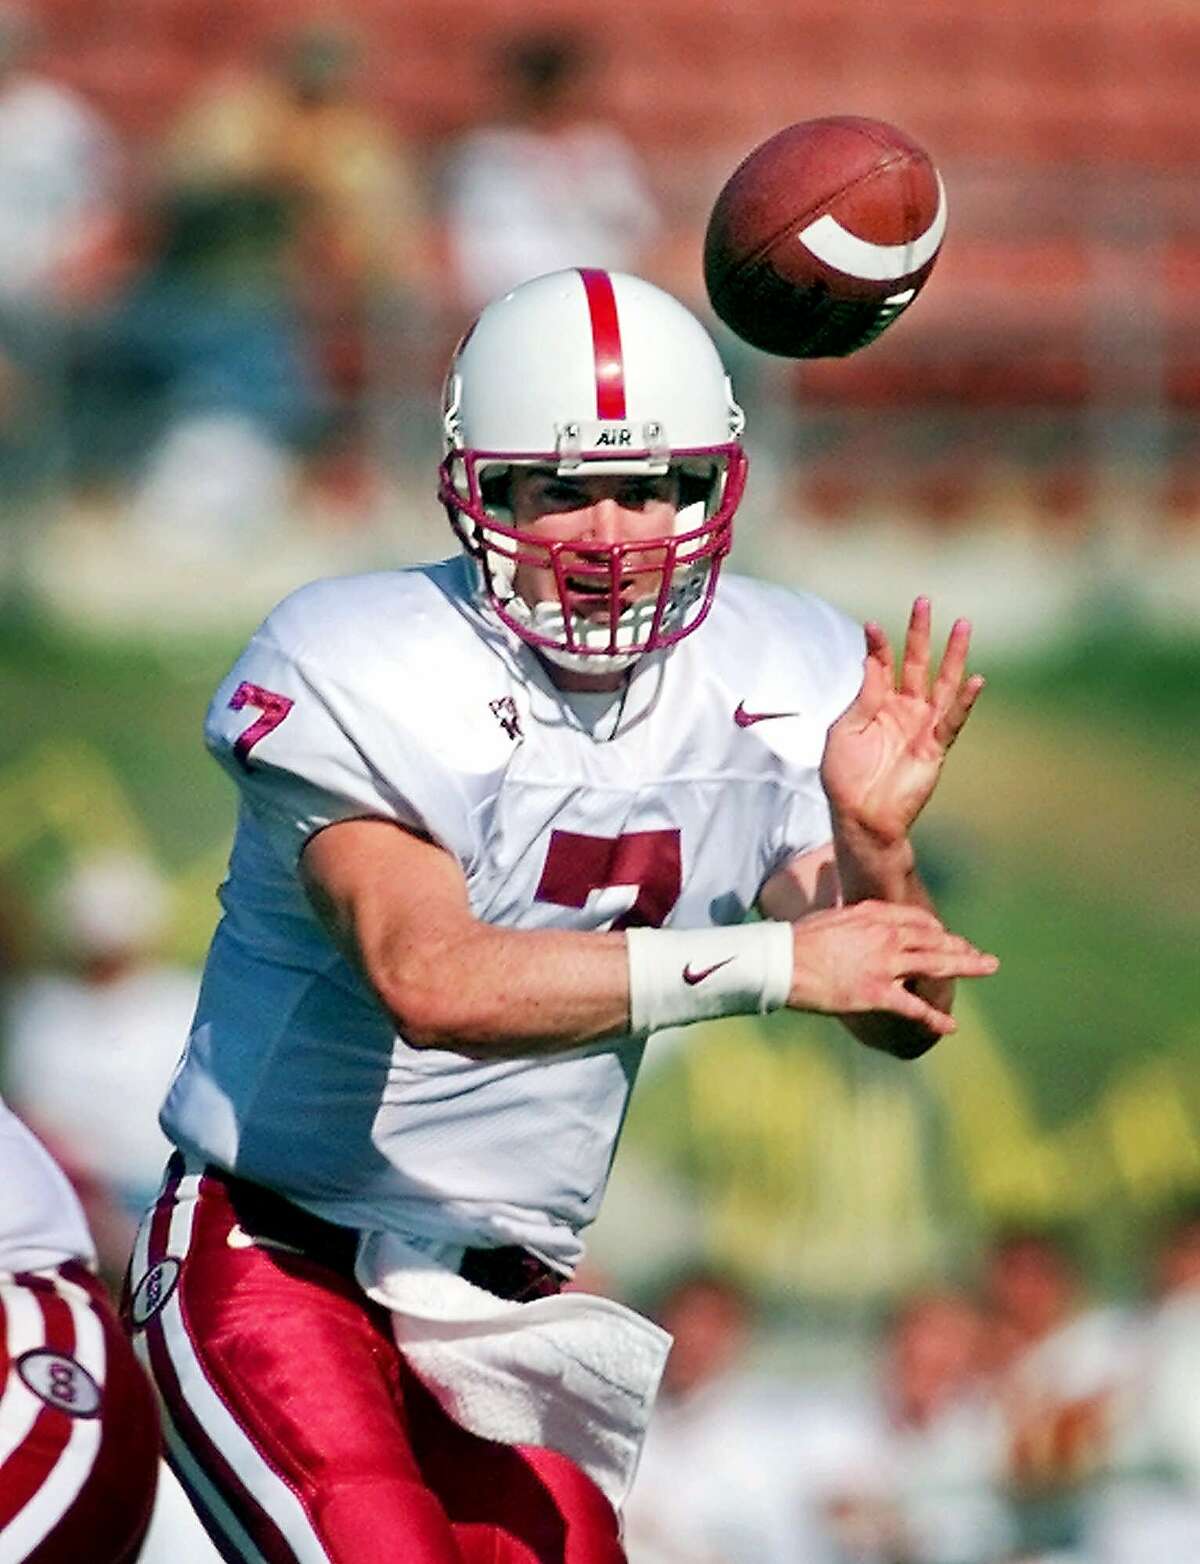 Stanford quarterback Todd Husak passes during the second half against Southern California, Saturday, Oct. 23, 1999, in Los Angeles. Stanford won 35-31. (AP Photo/Mark J. Terrill)